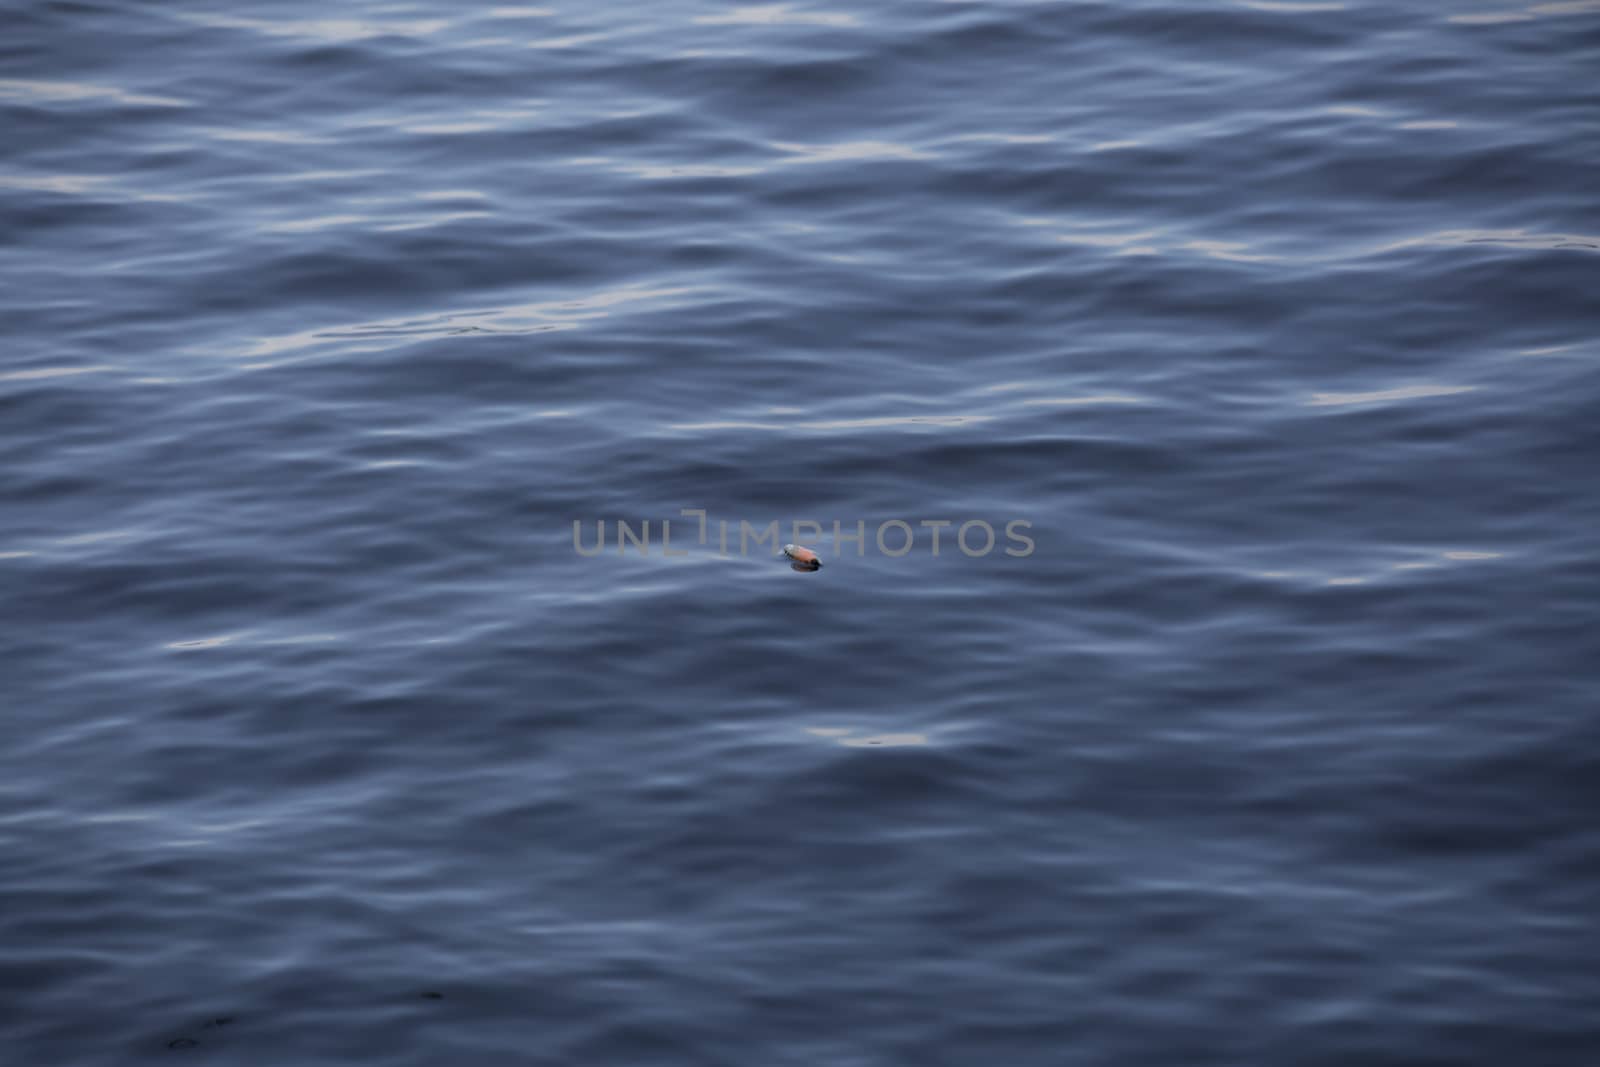 Fishing Bobber Floating on the Water by tornado98